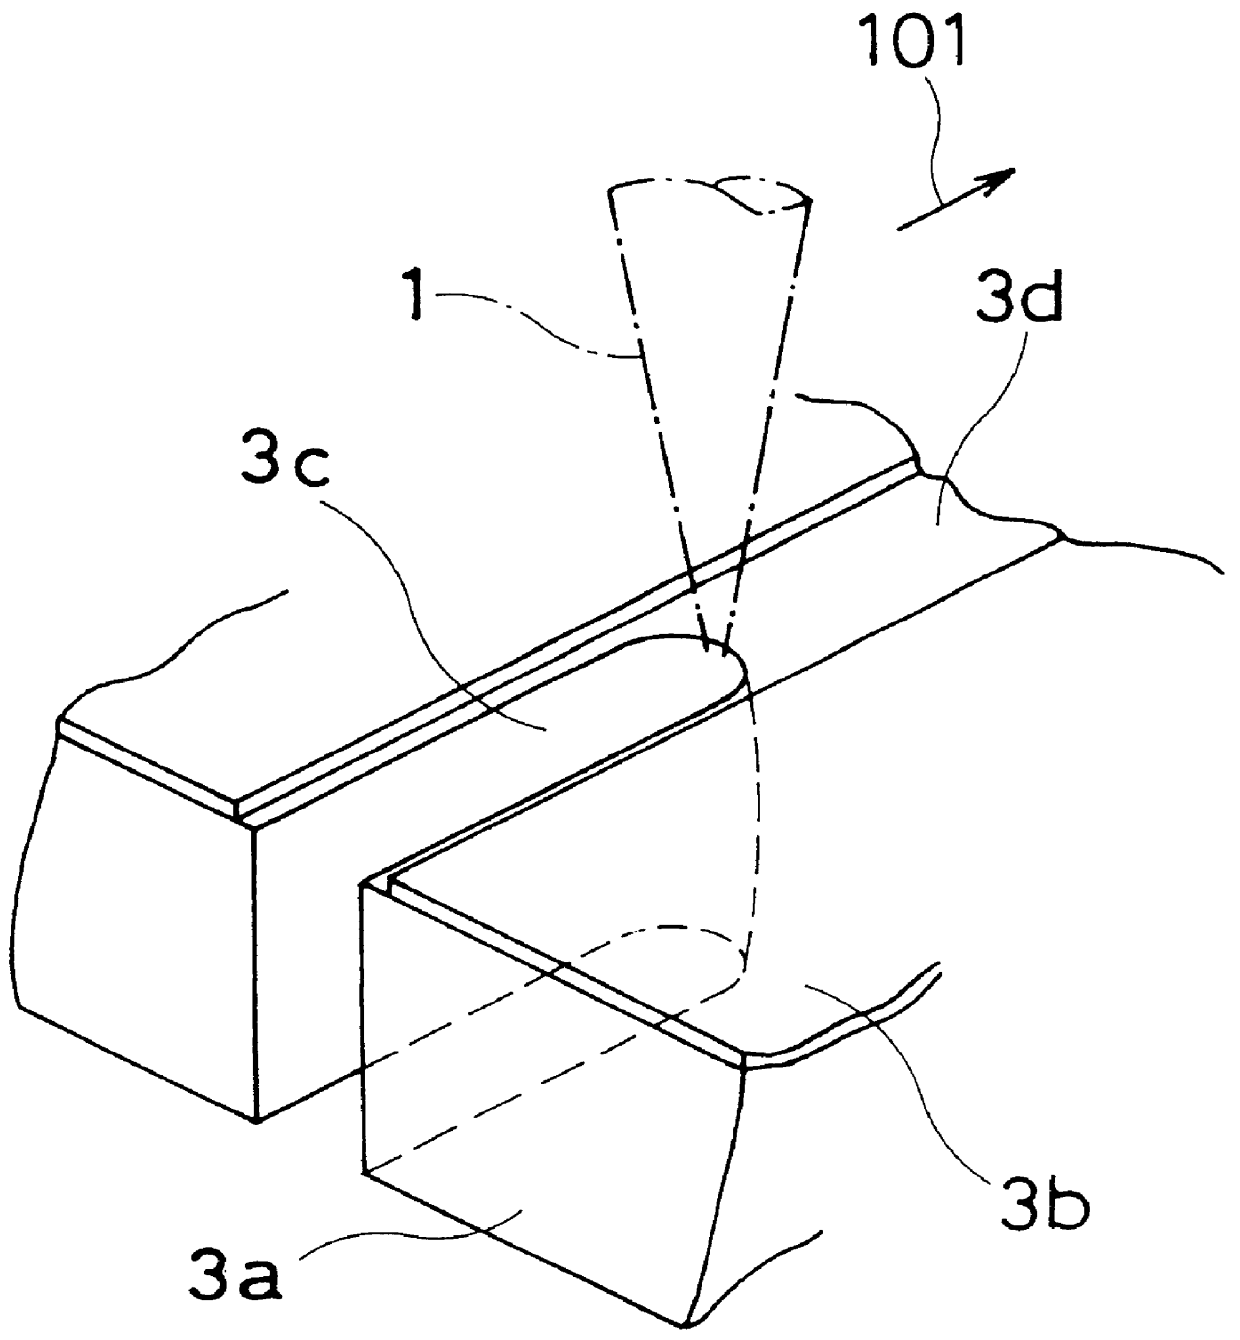 Laser beam machining apparatus and corresponding method which employs a laser beam to pretreat and machine a workpiece